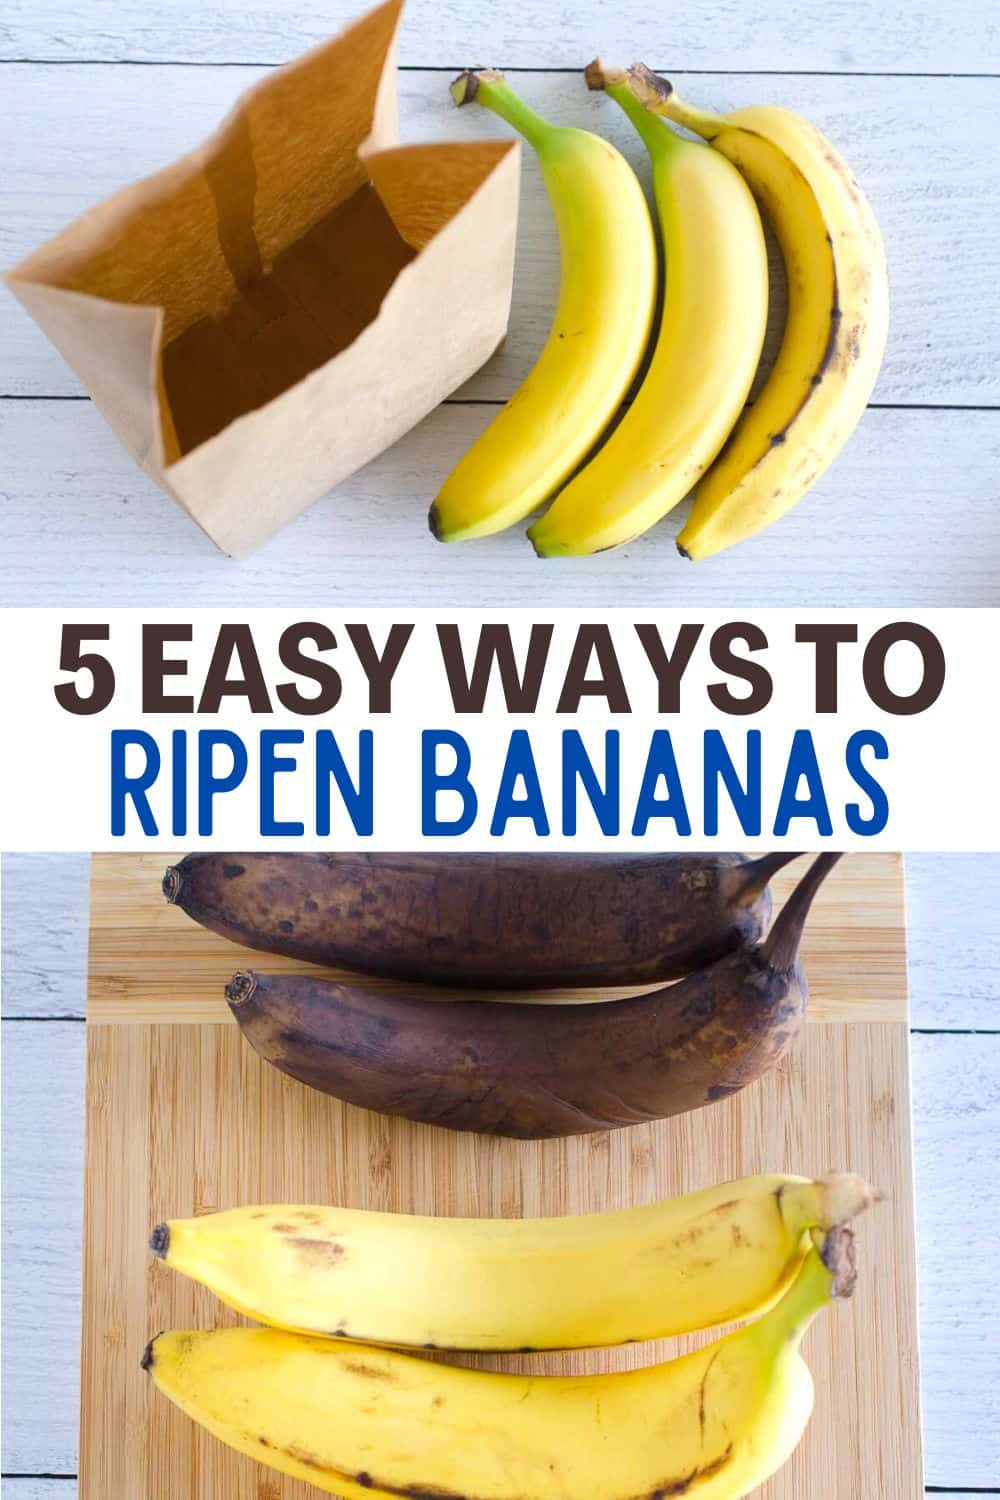 Check out these EASY tips and tricks on how to ripen bananas quickly so they're ready for your banana recipes. Some will surprise you!